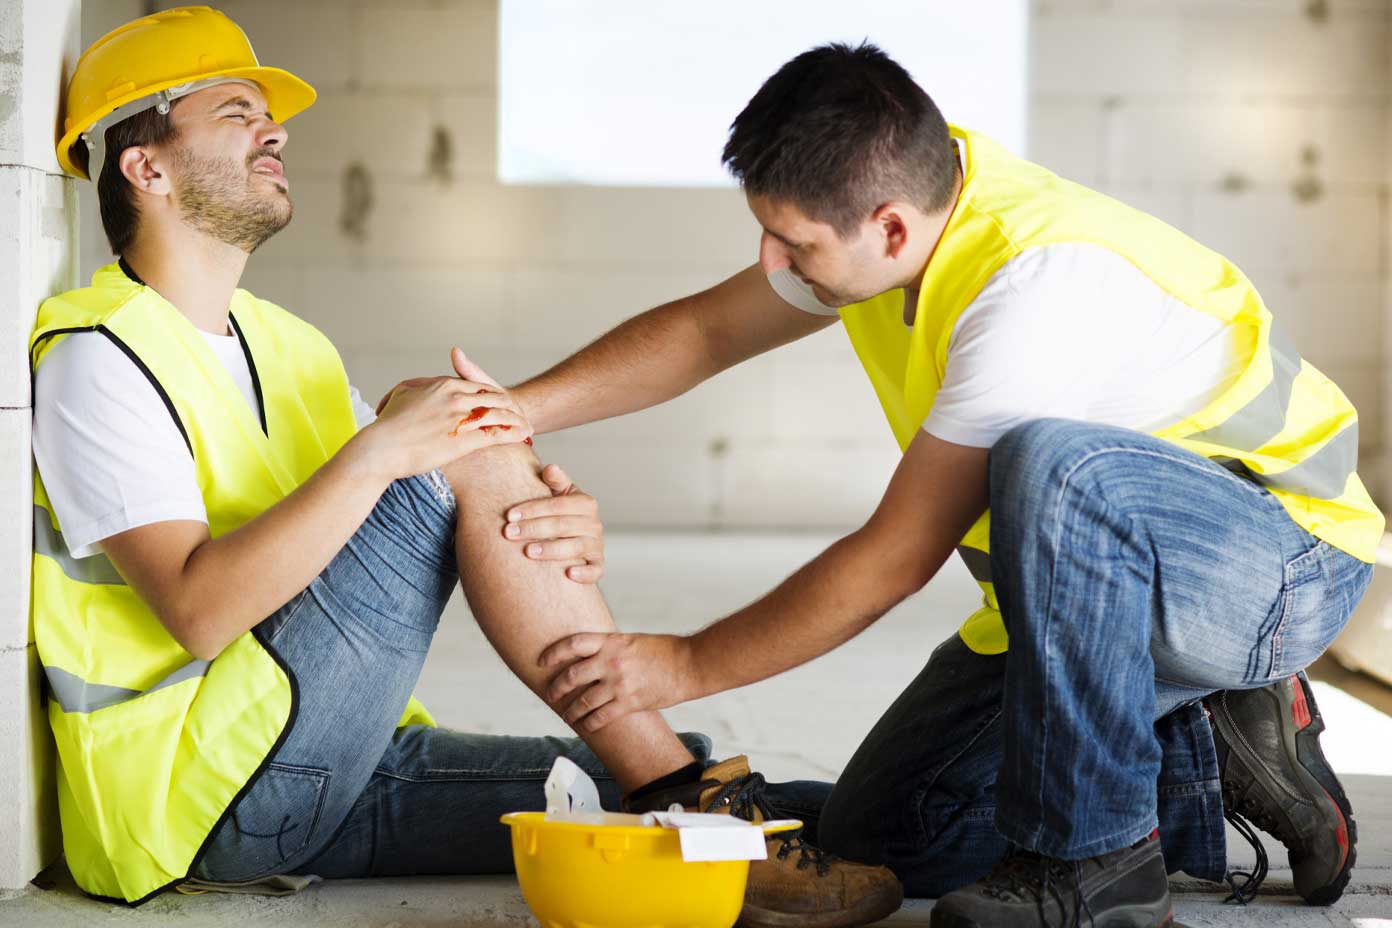 What is injury management